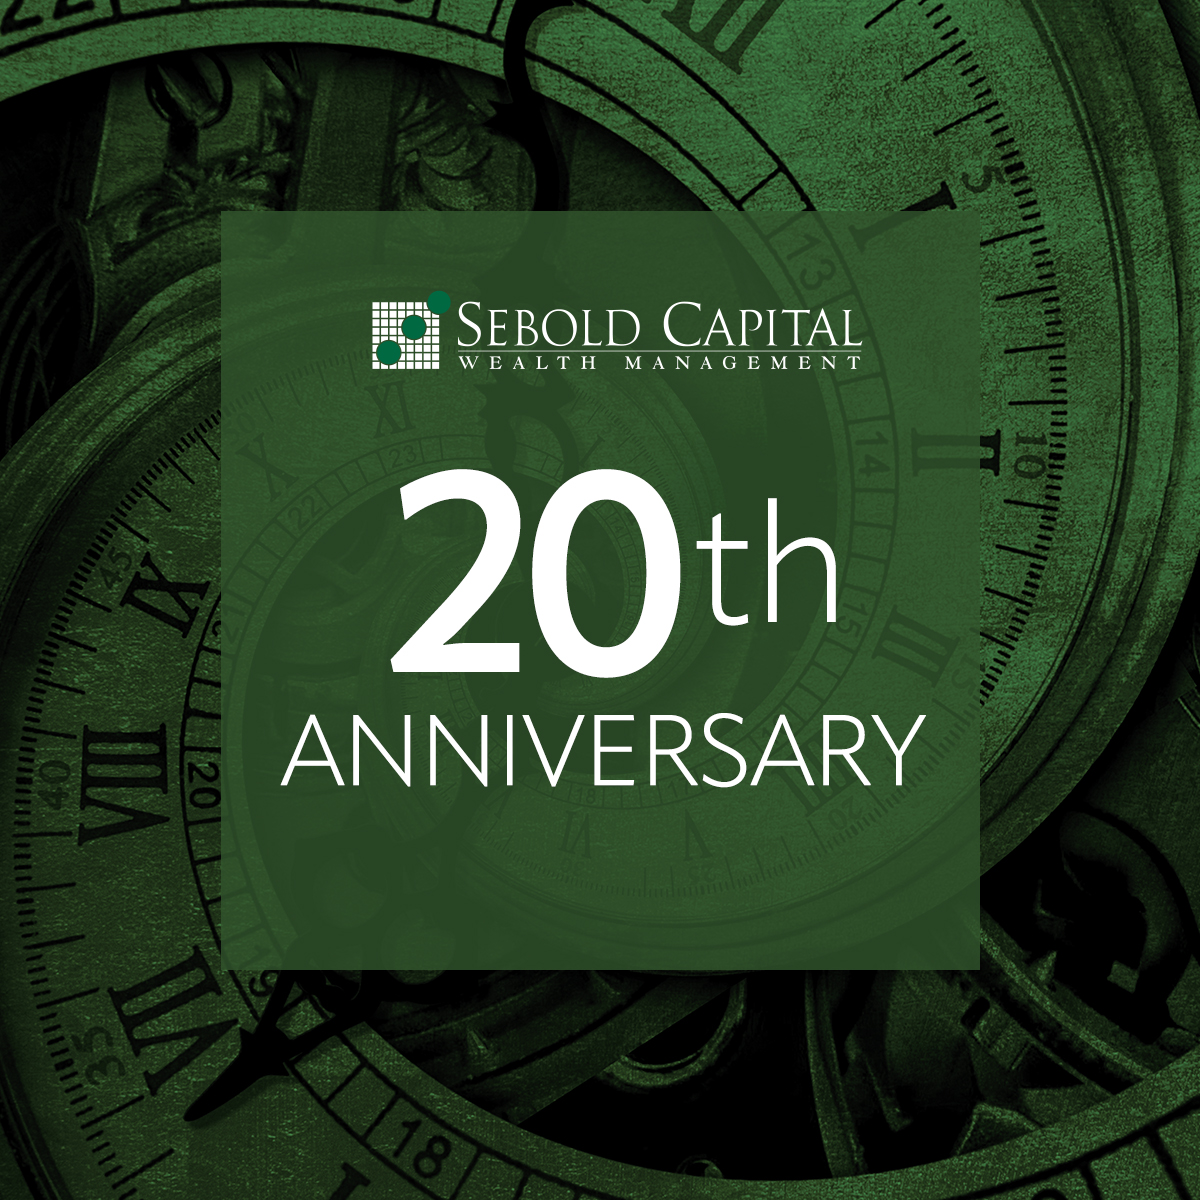 Featured image for “Sebold Capital Management Celebrates its 20th Anniversary”